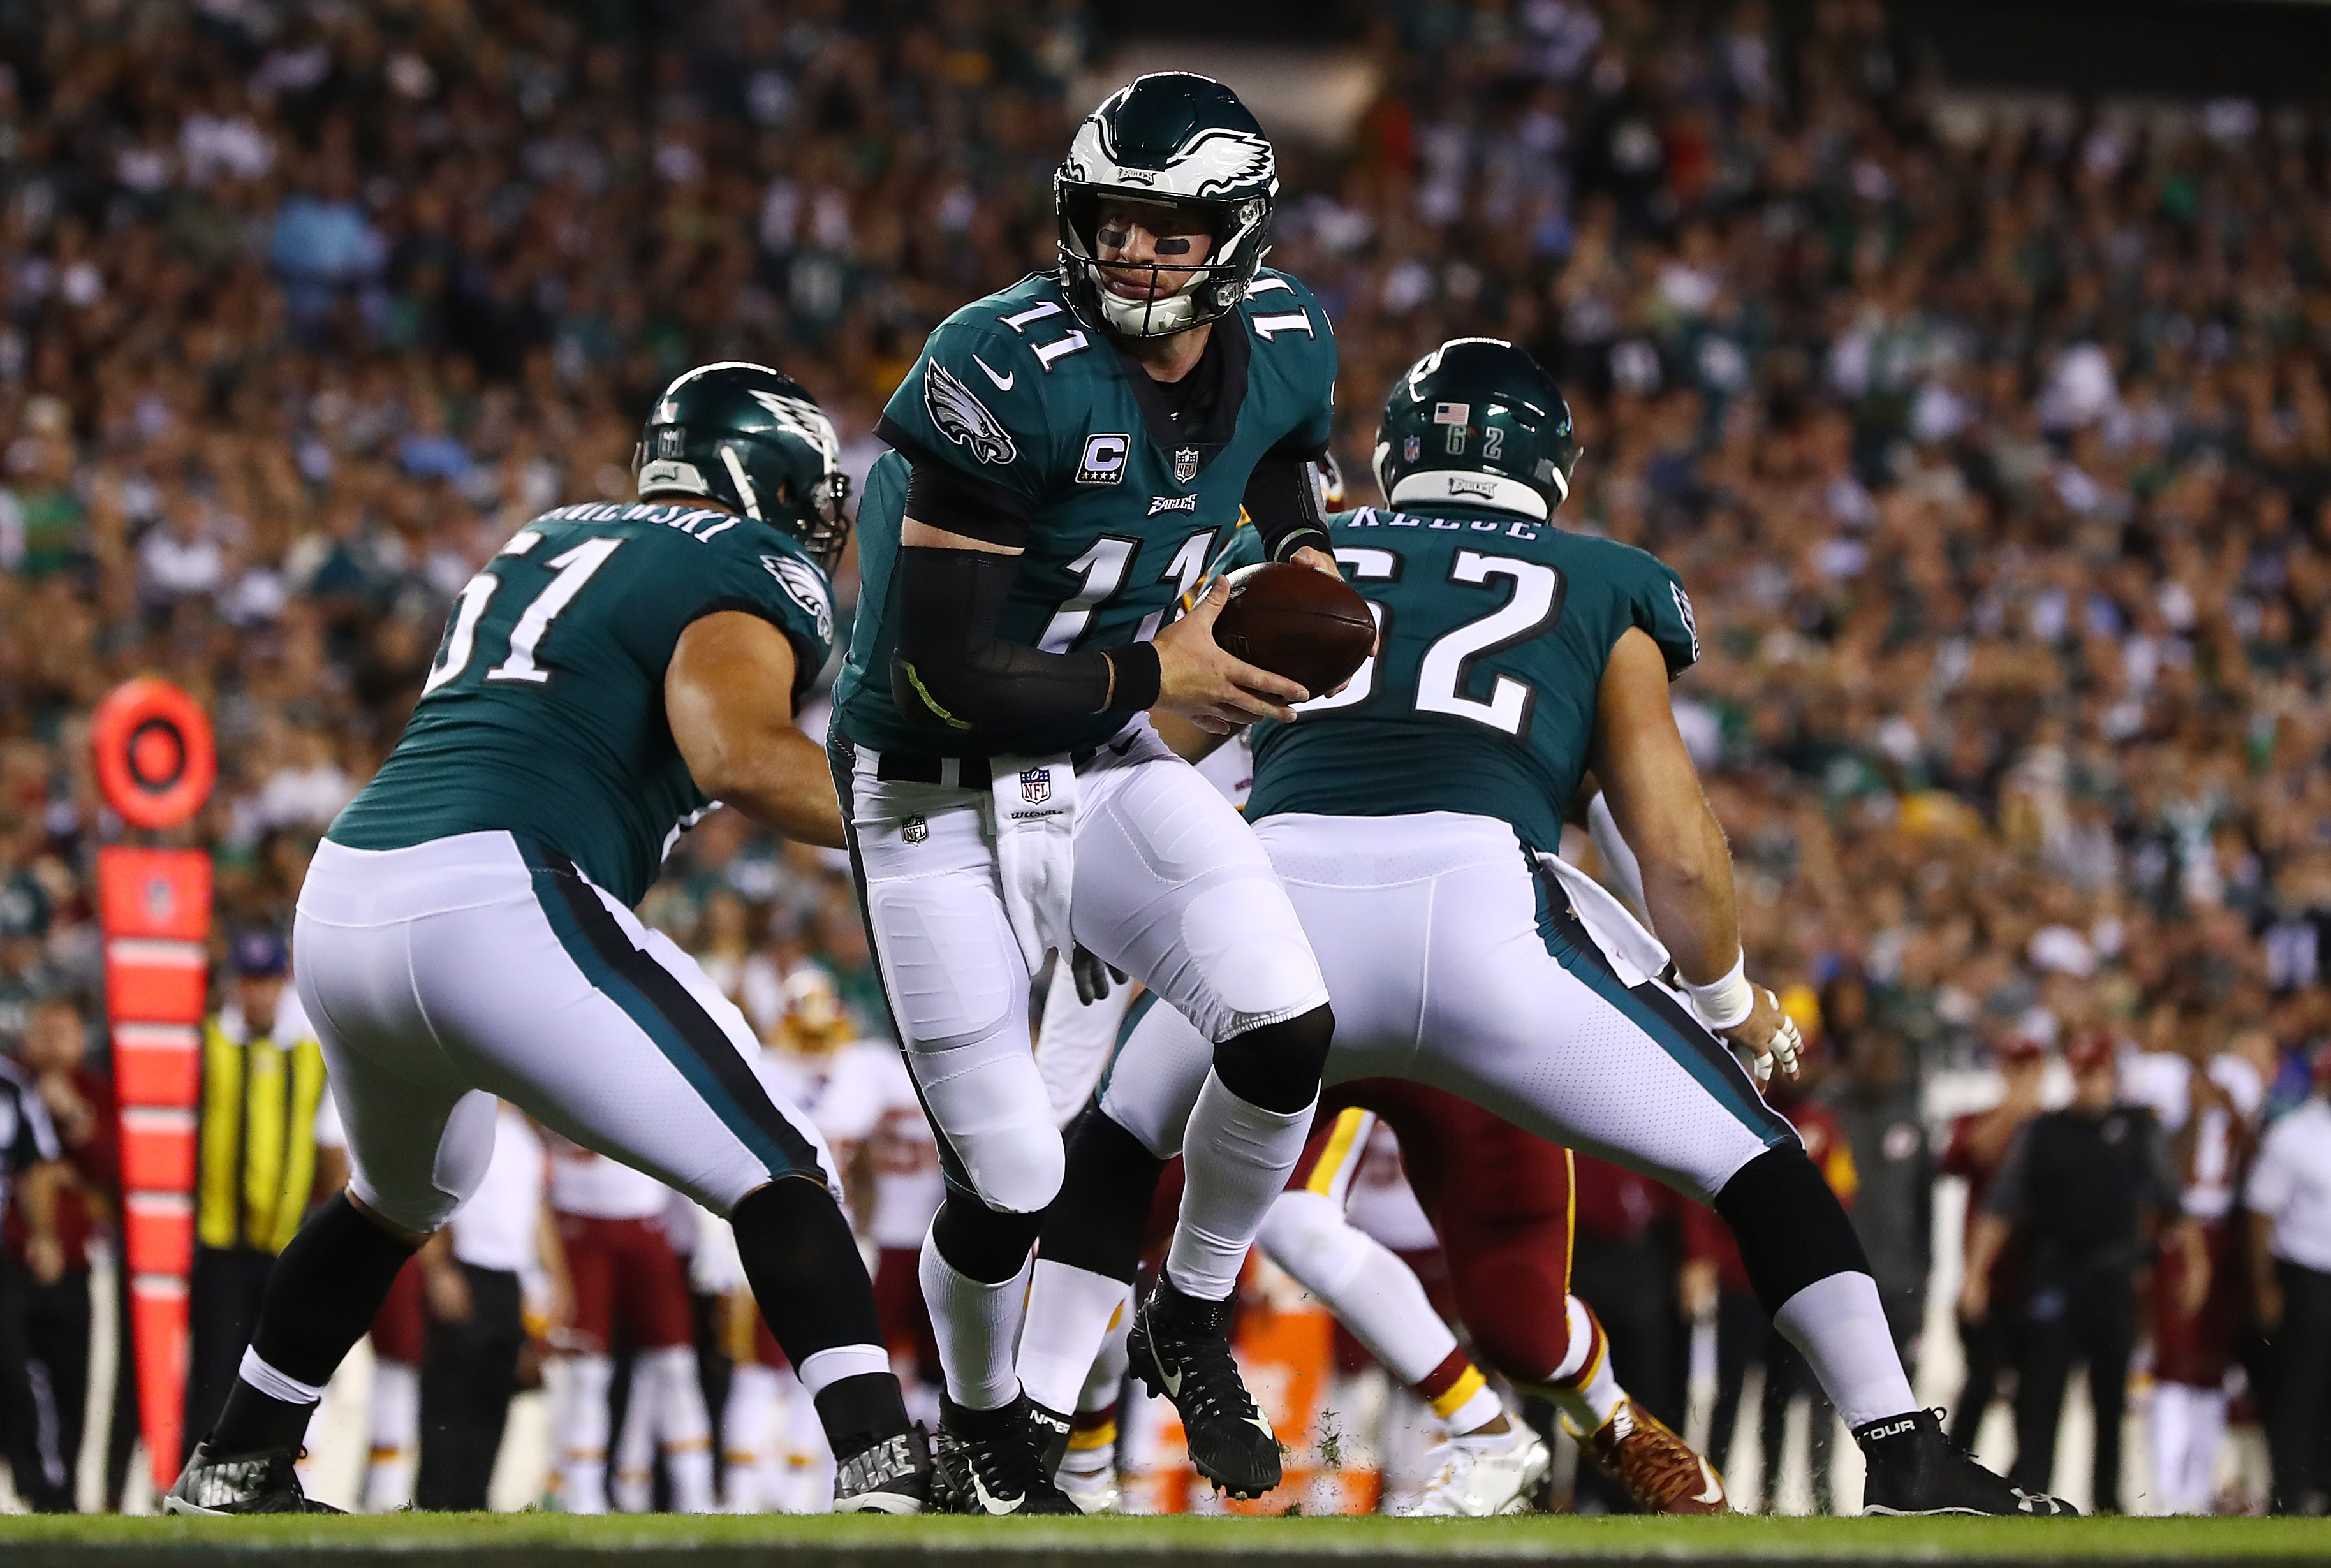 How to Watch Redskins vs Eagles Online Free: Monday Night